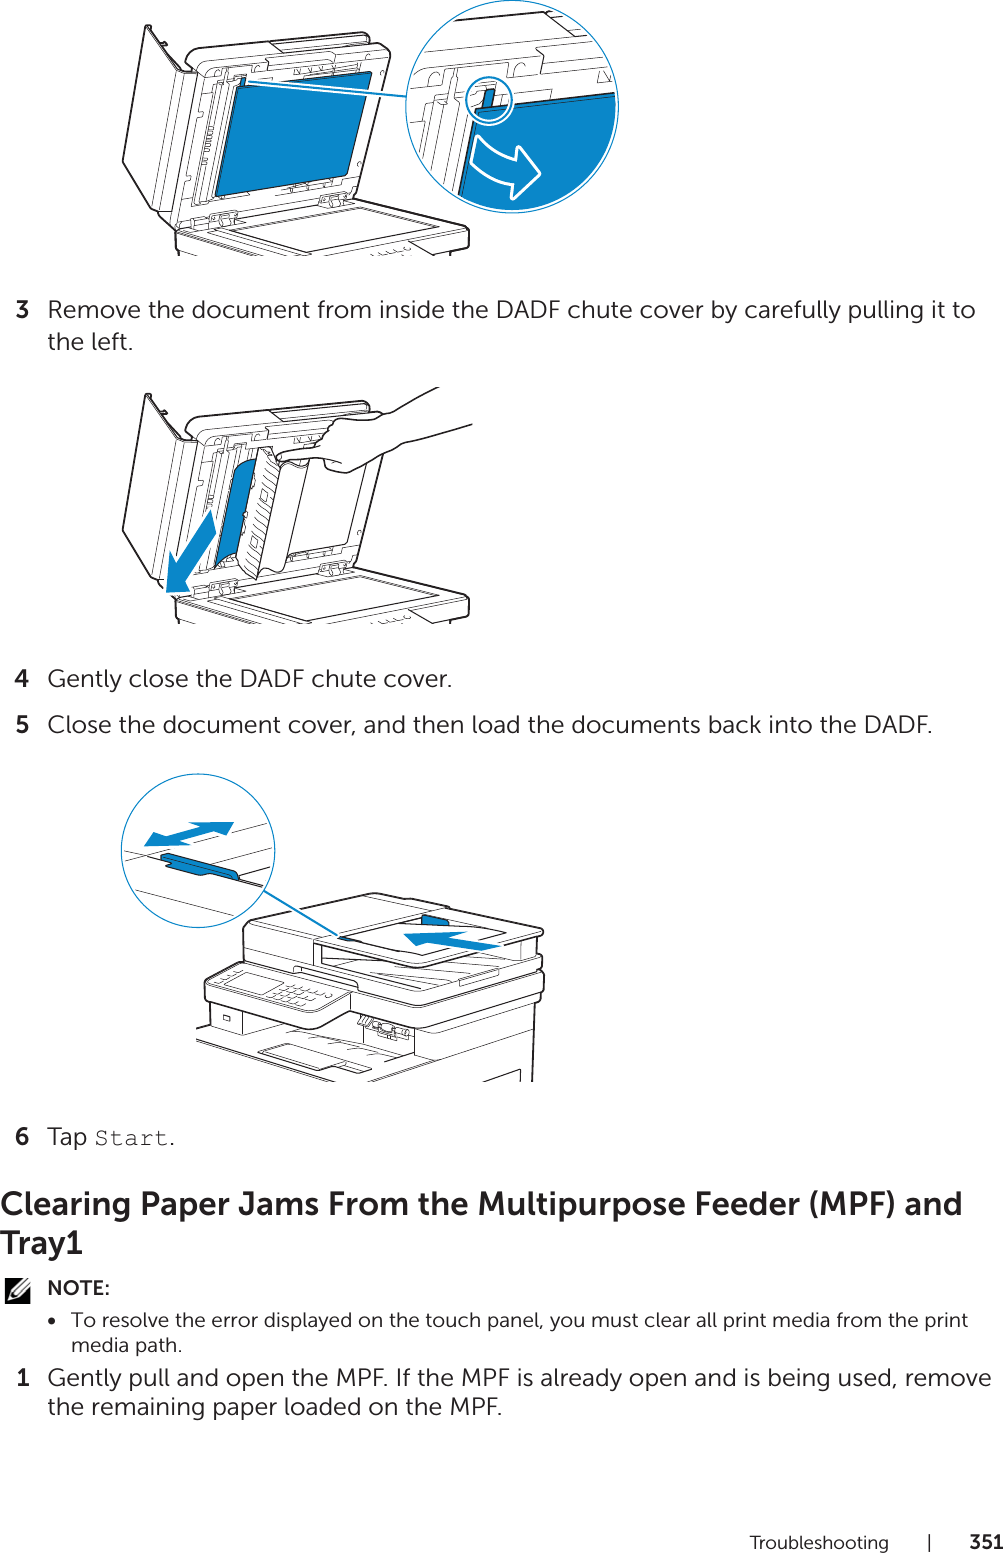 Troubleshooting |3513Remove the document from inside the DADF chute cover by carefully pulling it to the left.4Gently close the DADF chute cover.5Close the document cover, and then load the documents back into the DADF.6Tap Start.Clearing Paper Jams From the Multipurpose Feeder (MPF) and Tray1NOTE:•To resolve the error displayed on the touch panel, you must clear all print media from the print media path.1Gently pull and open the MPF. If the MPF is already open and is being used, remove the remaining paper loaded on the MPF.